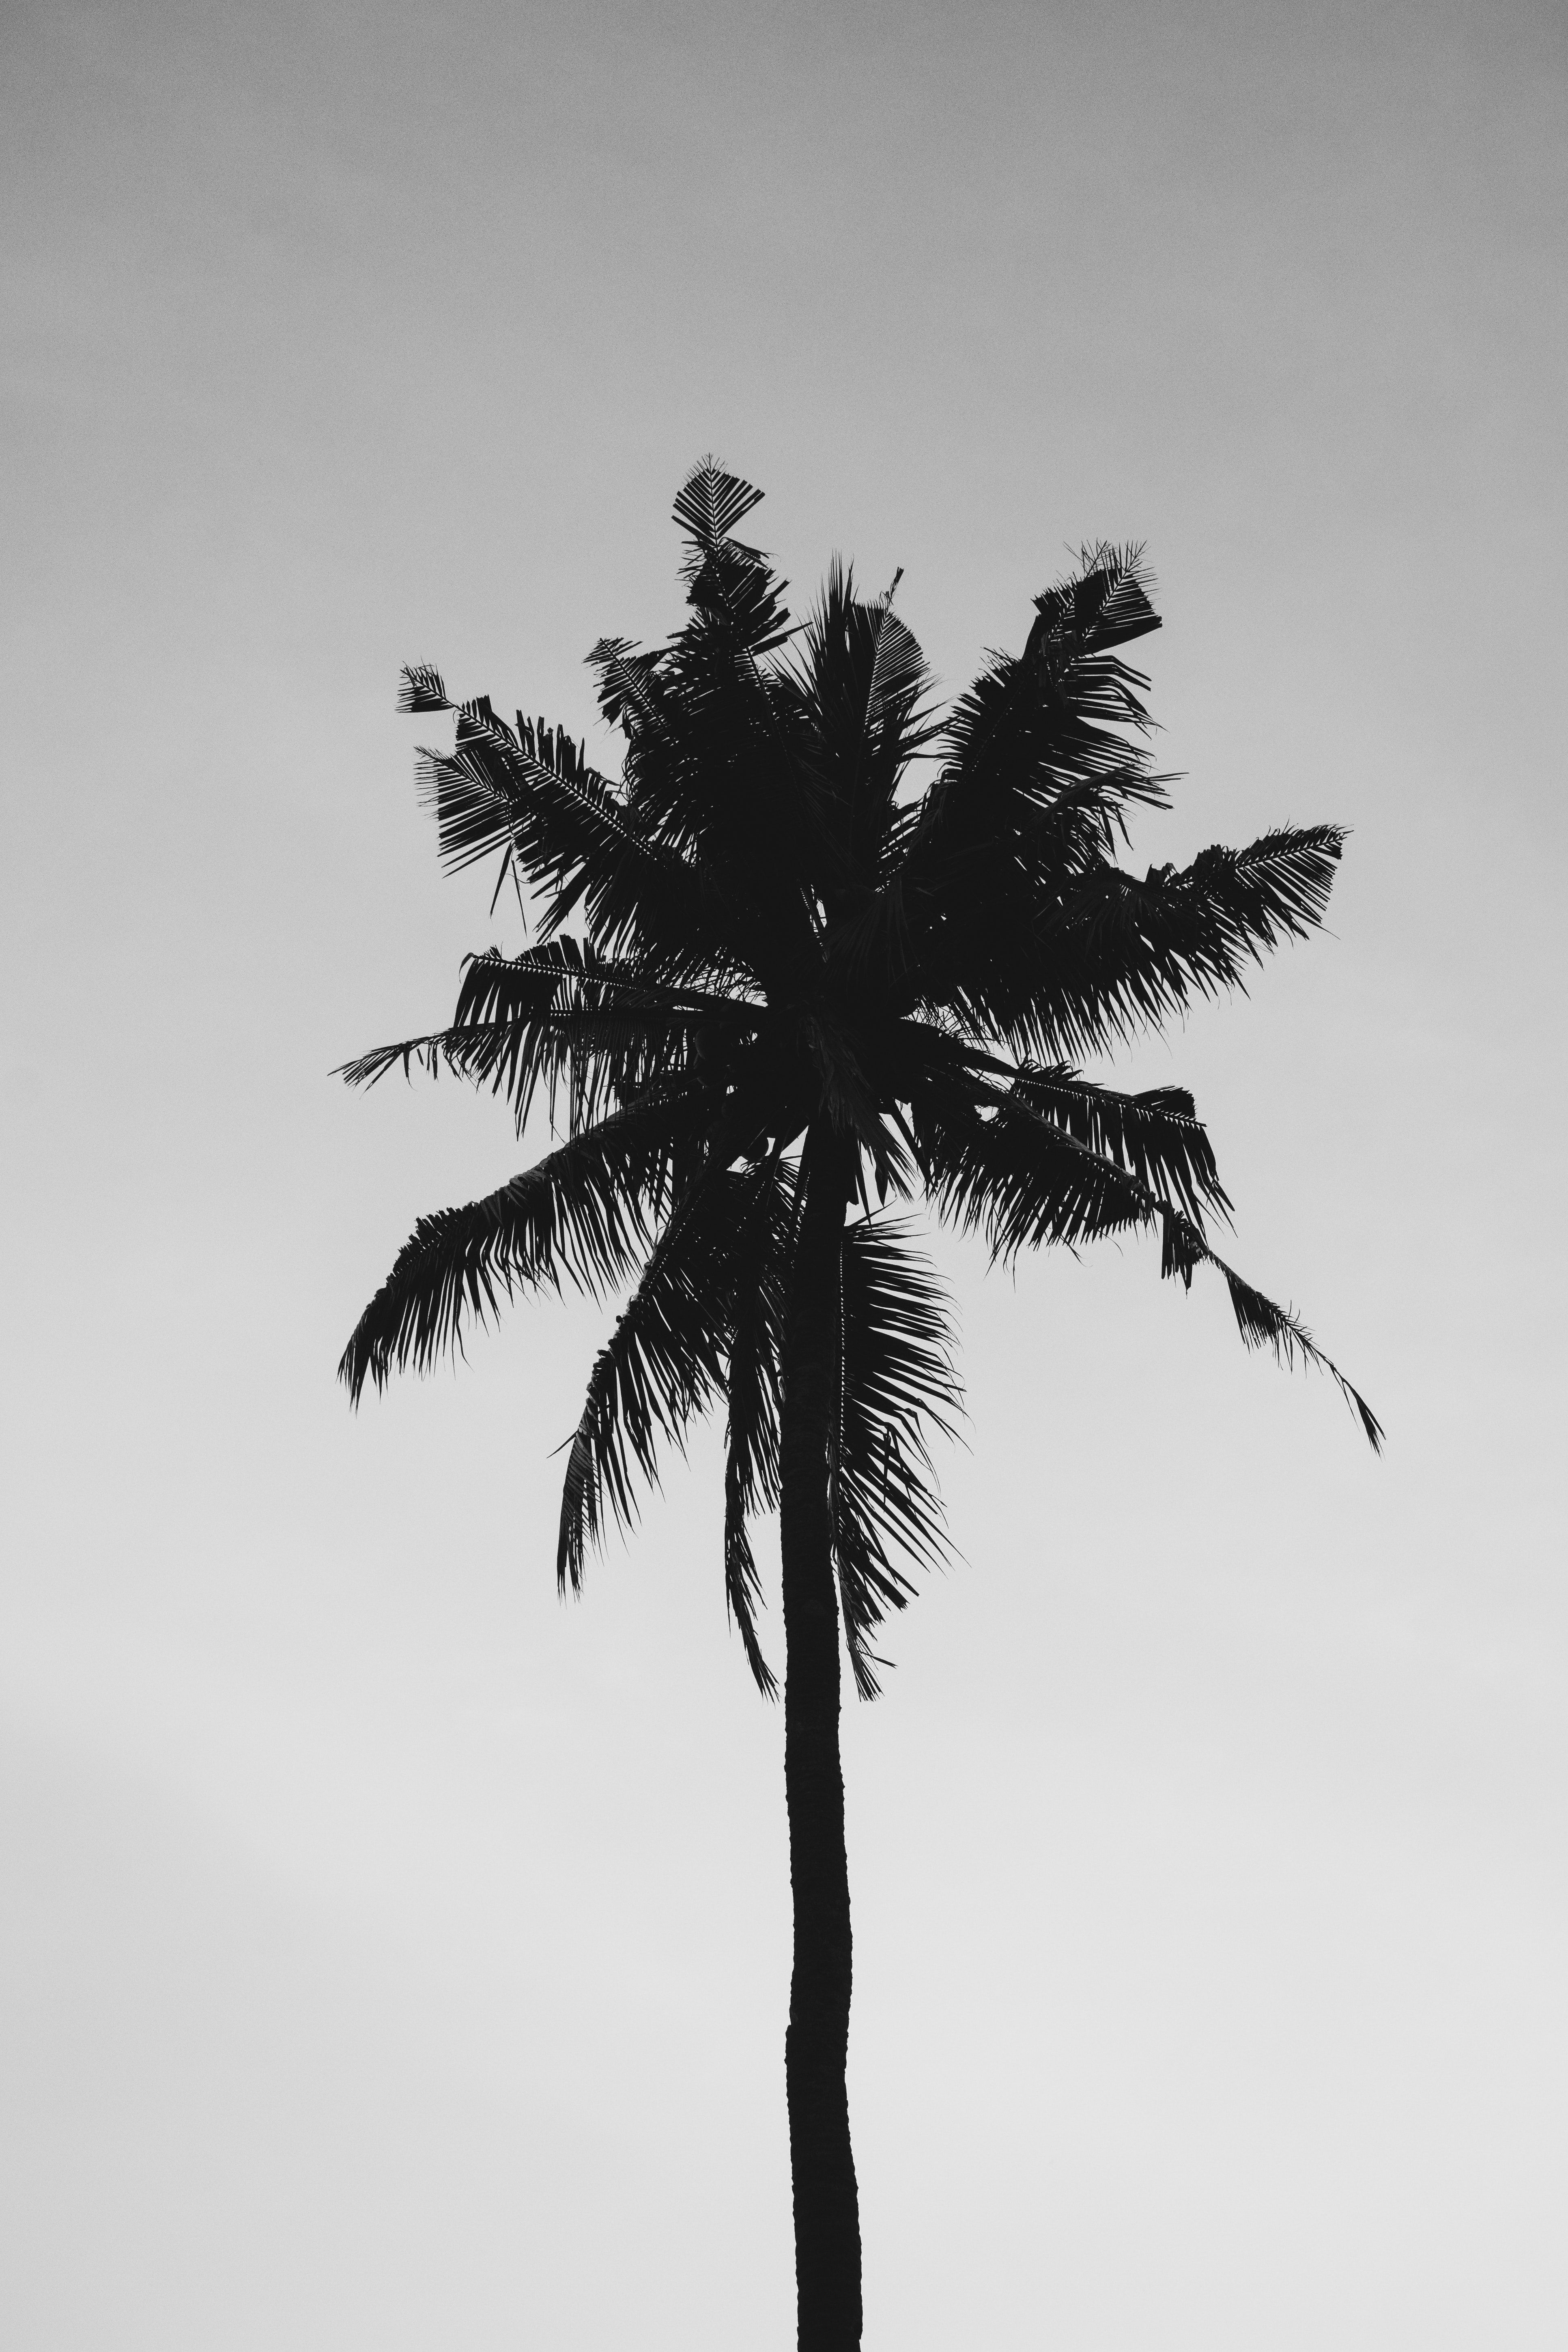 A black and white photo of palm trees - White, black and white, palm tree